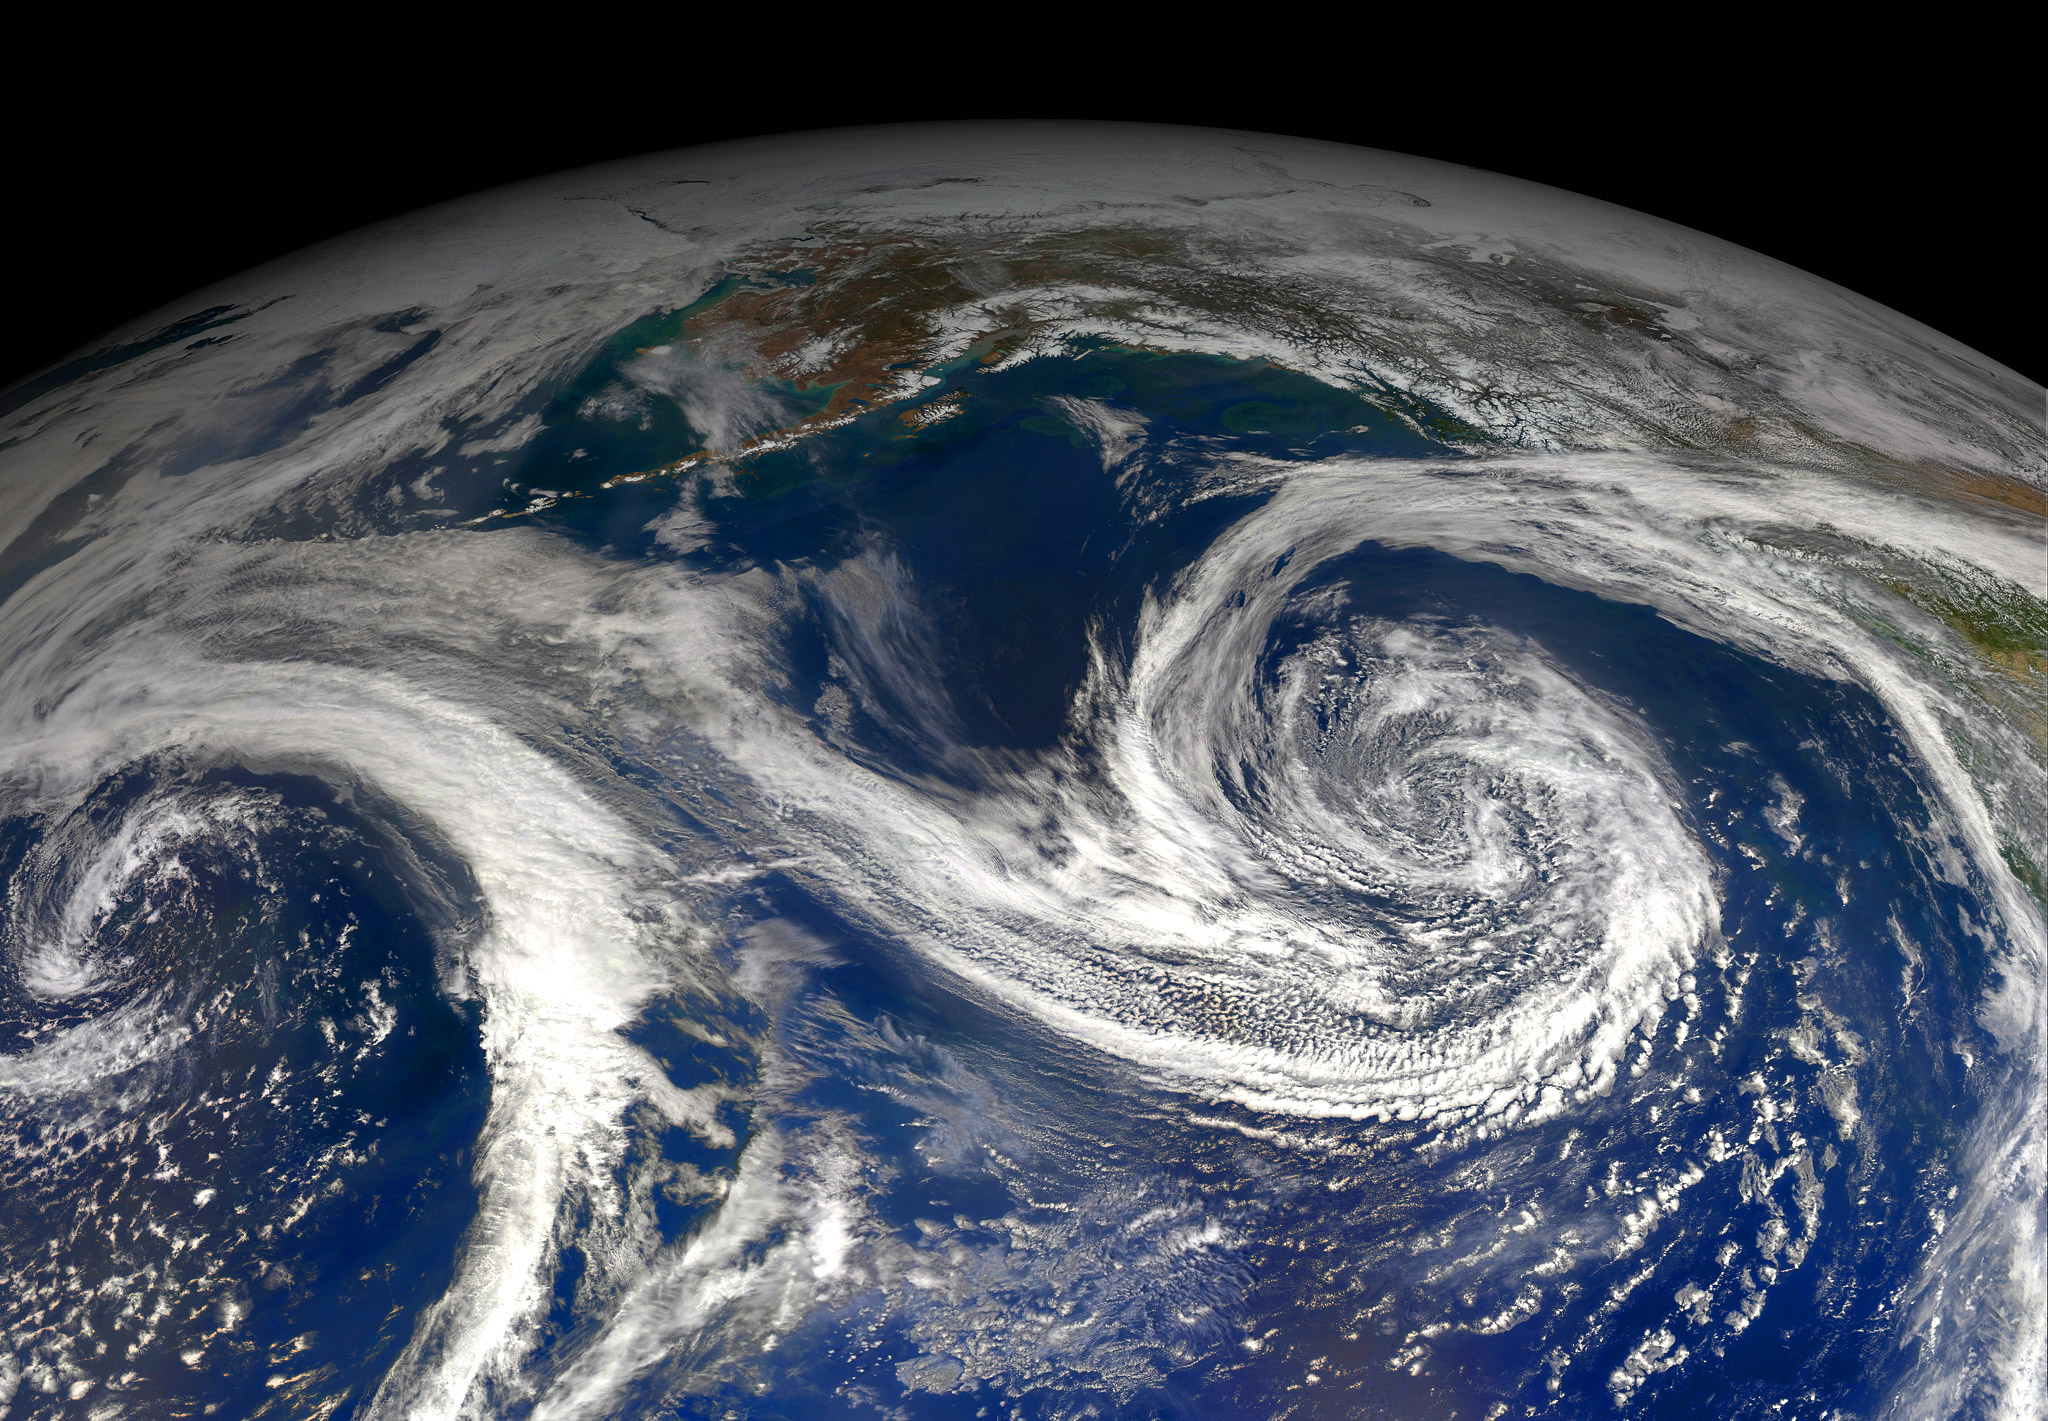 Planet earth, with swirling clouds